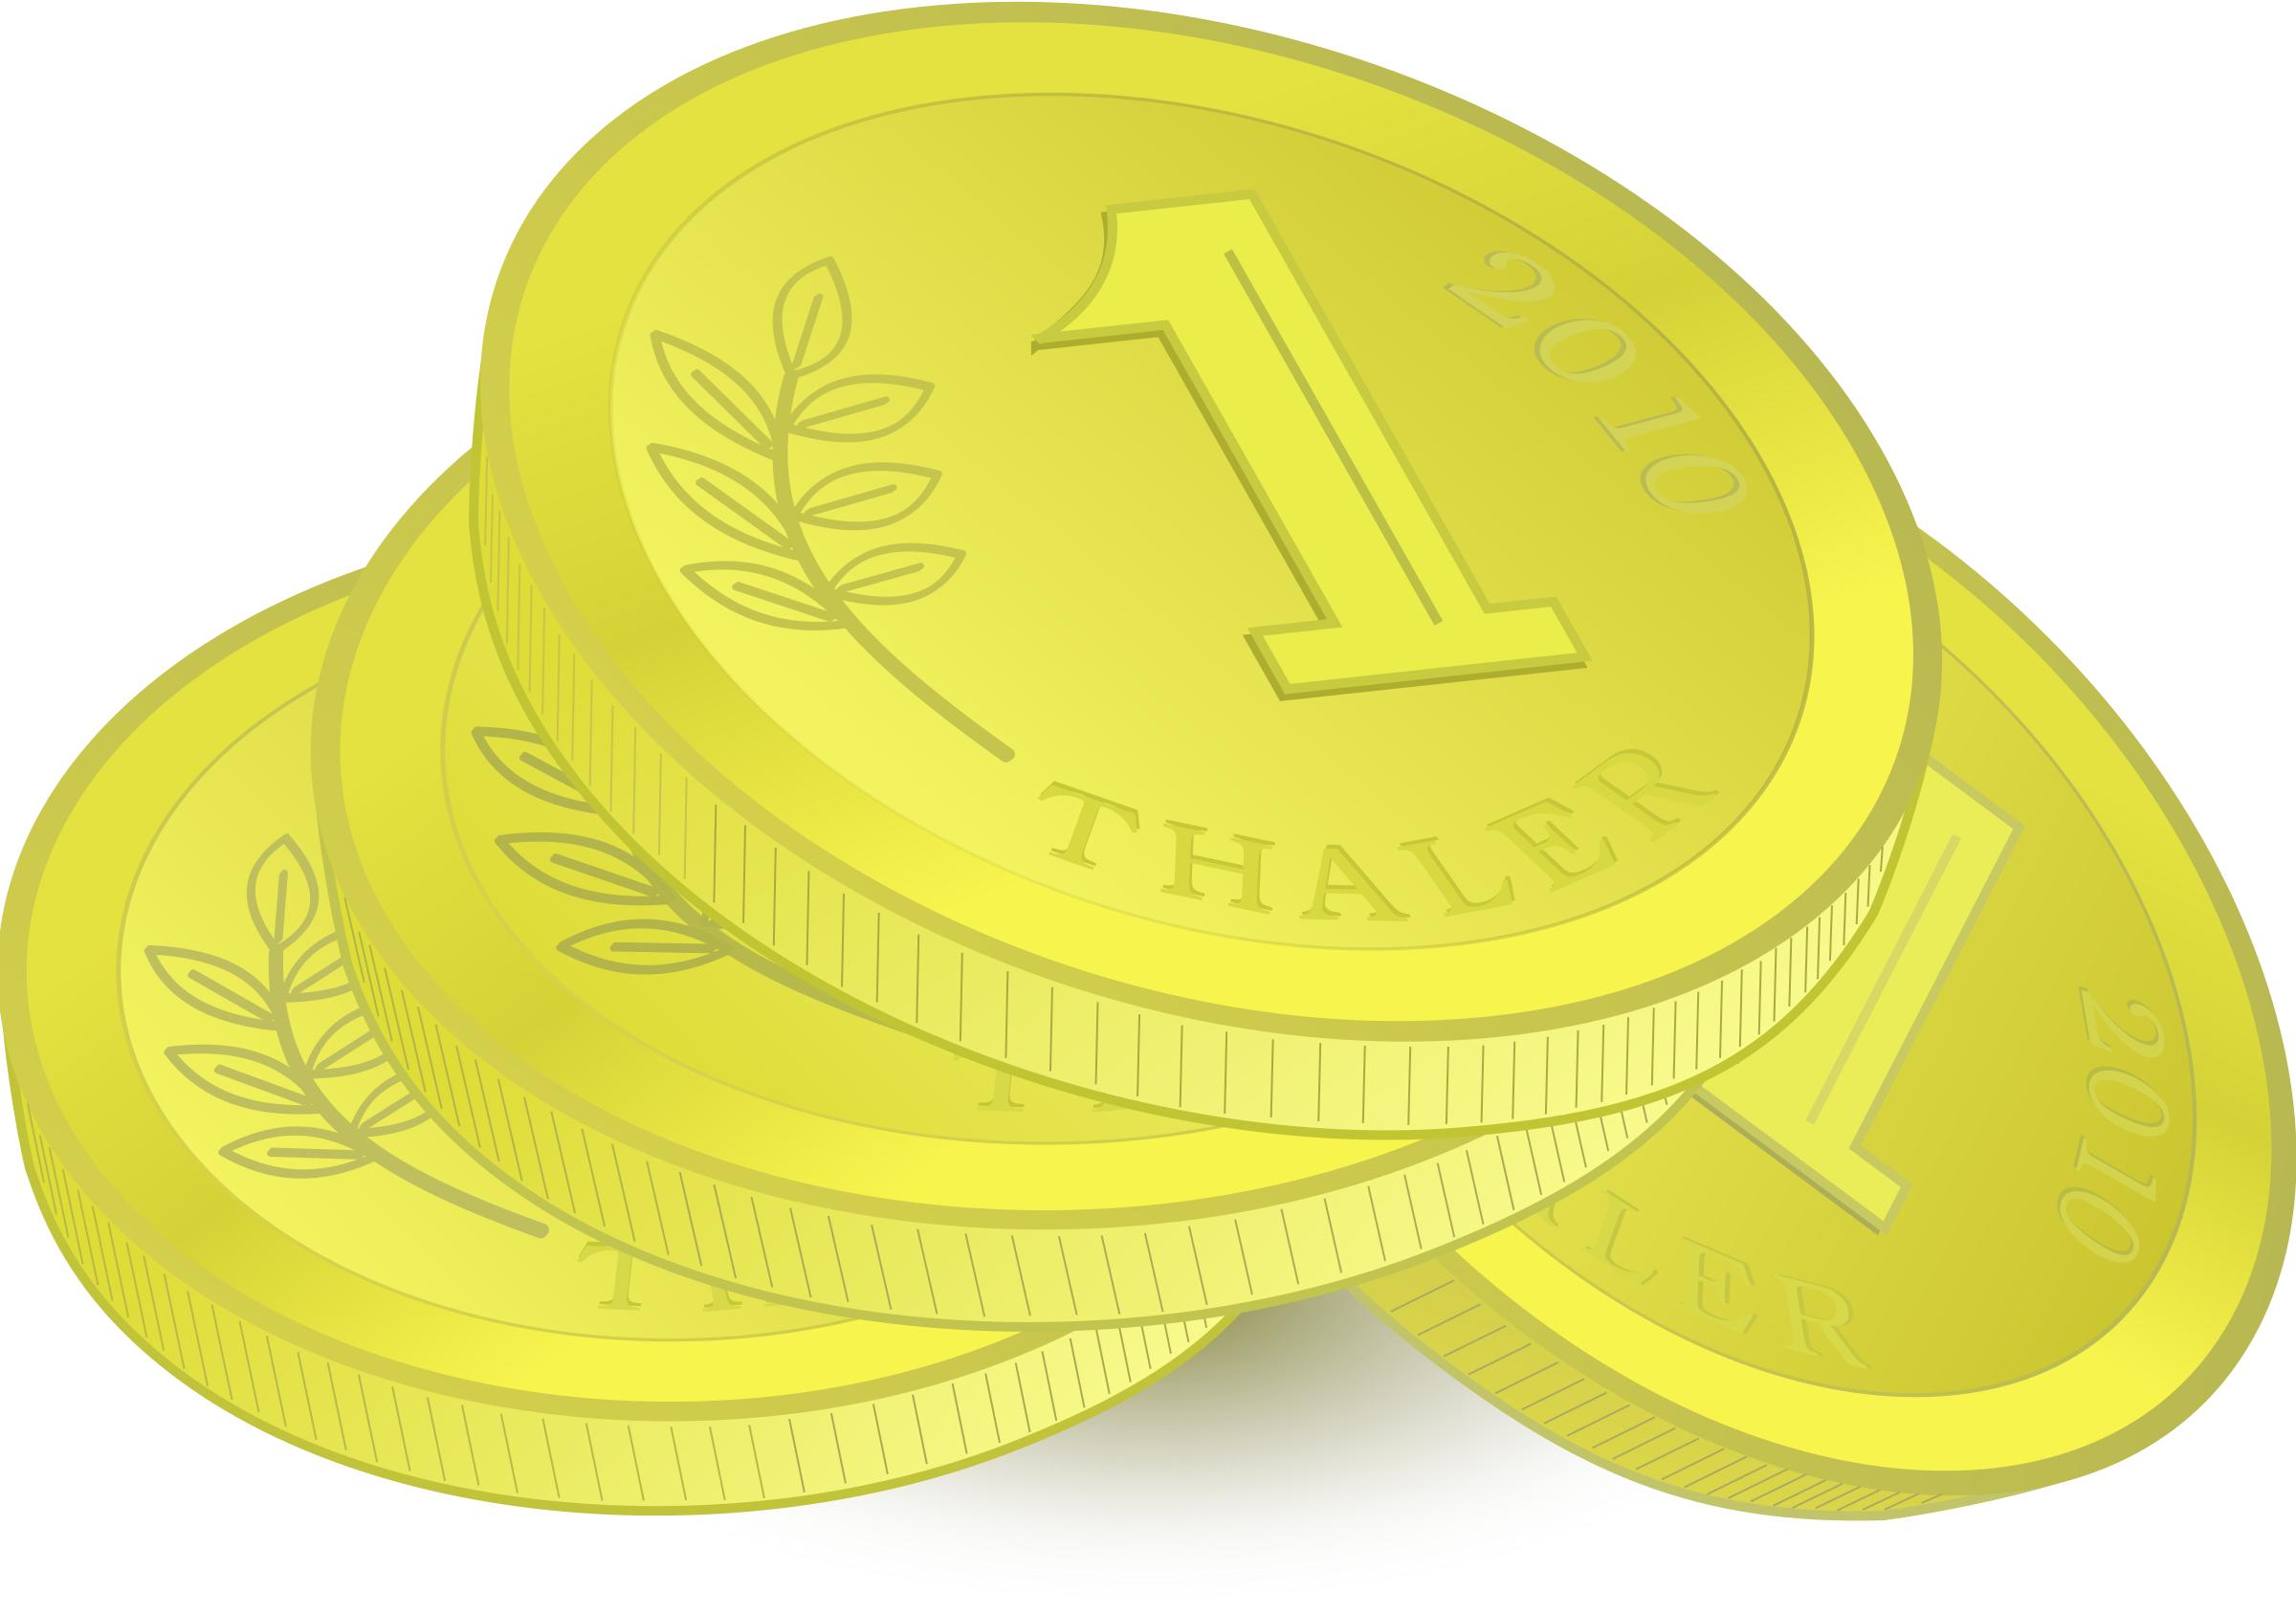 Pile of Golden Coins png